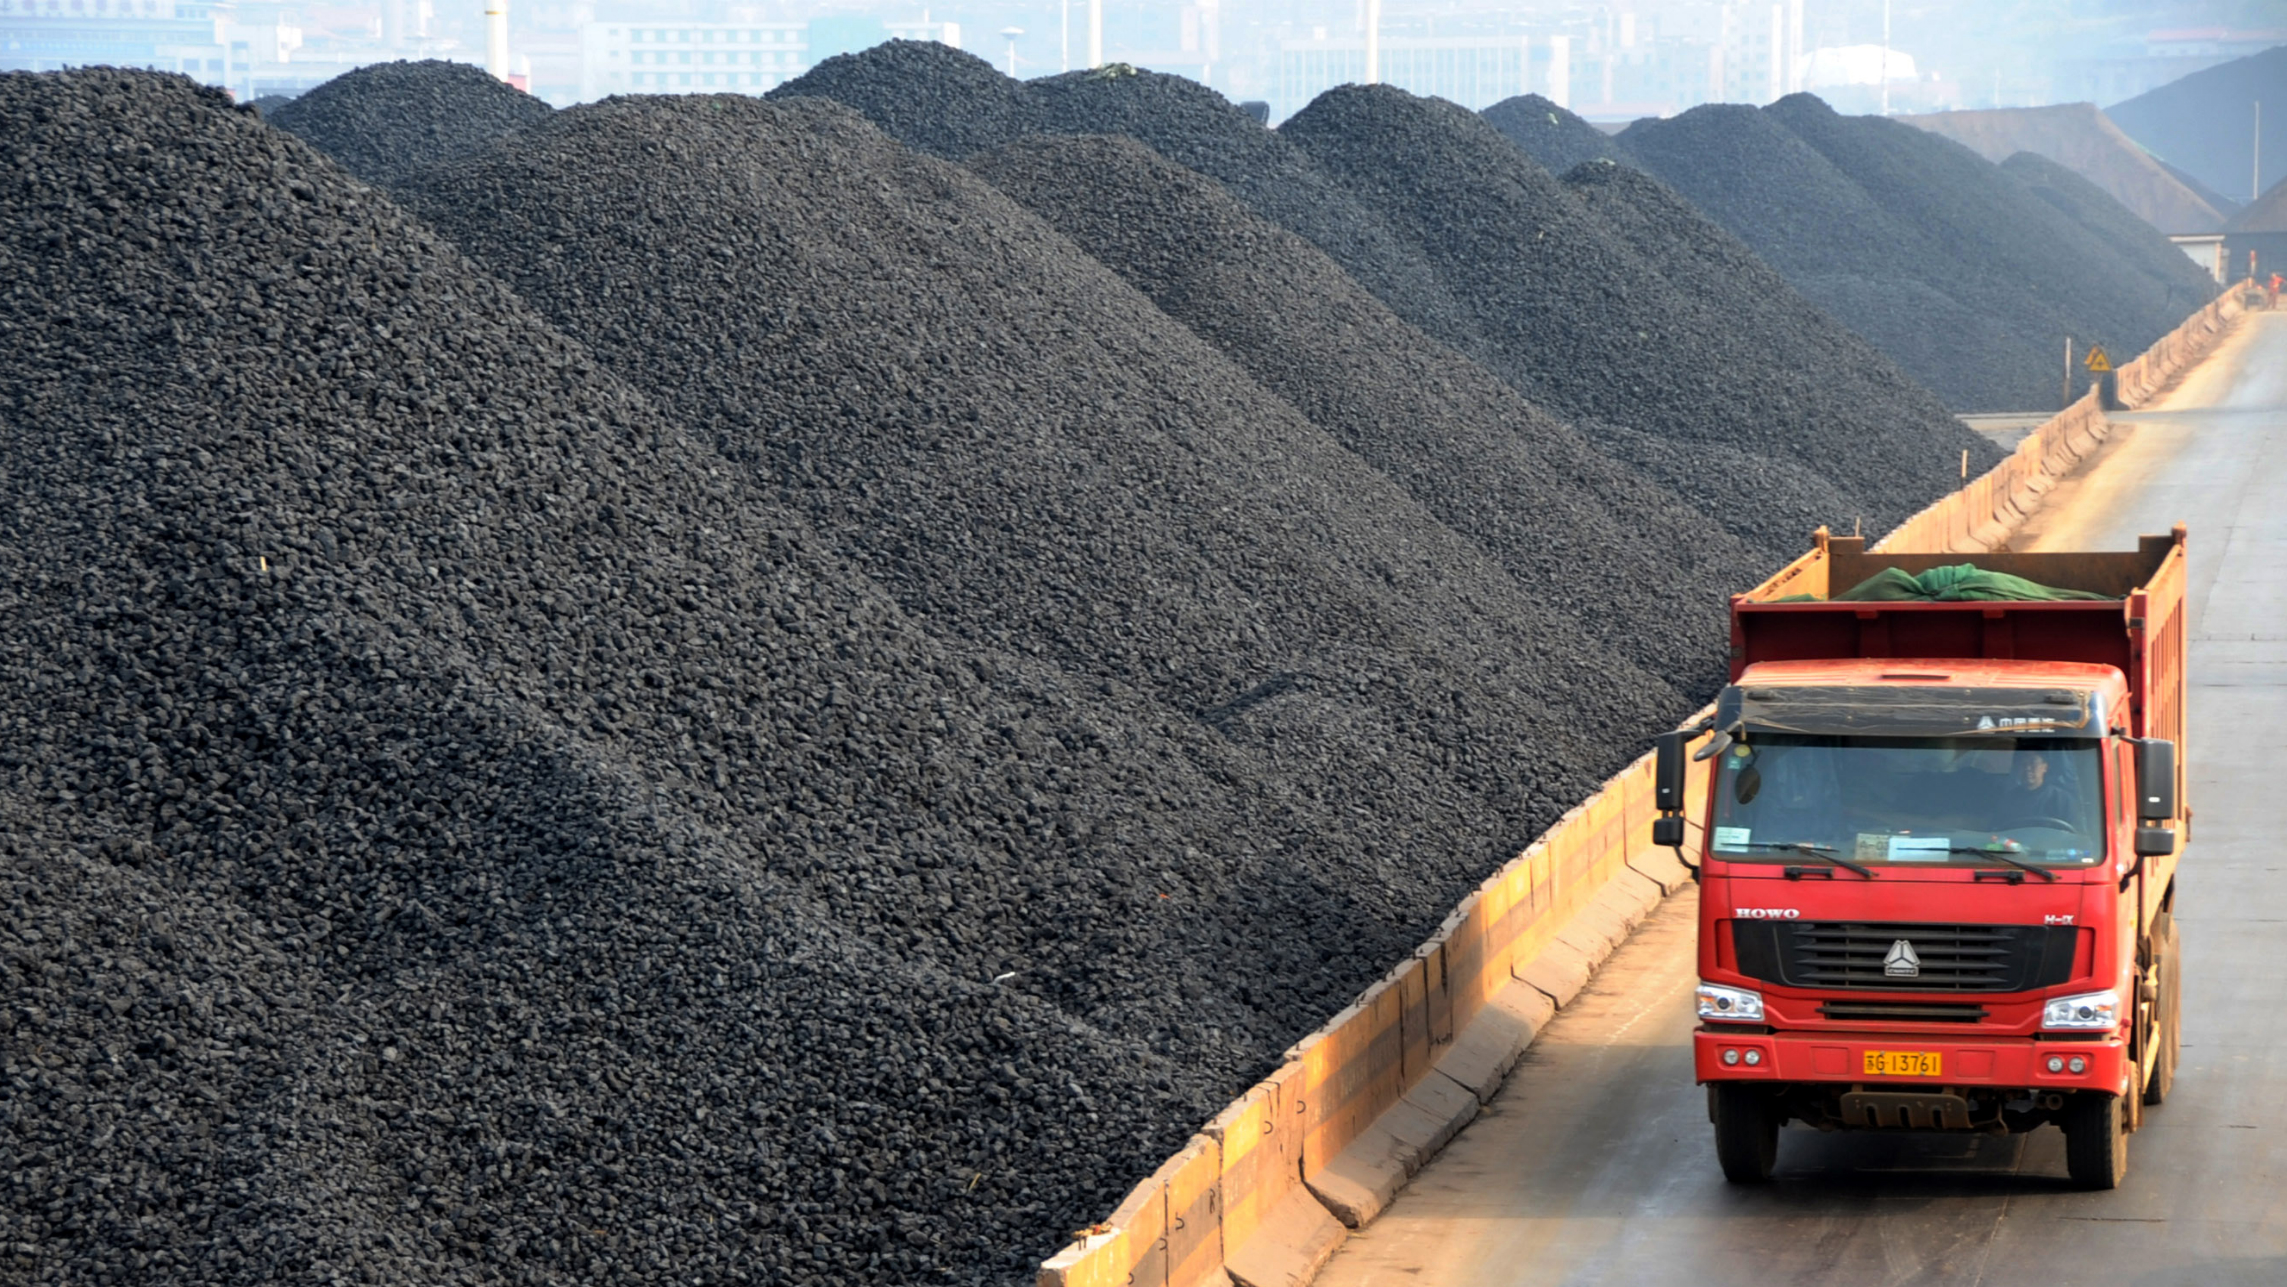 Coal: after the $100 per metric ton boom, how long until the bust?